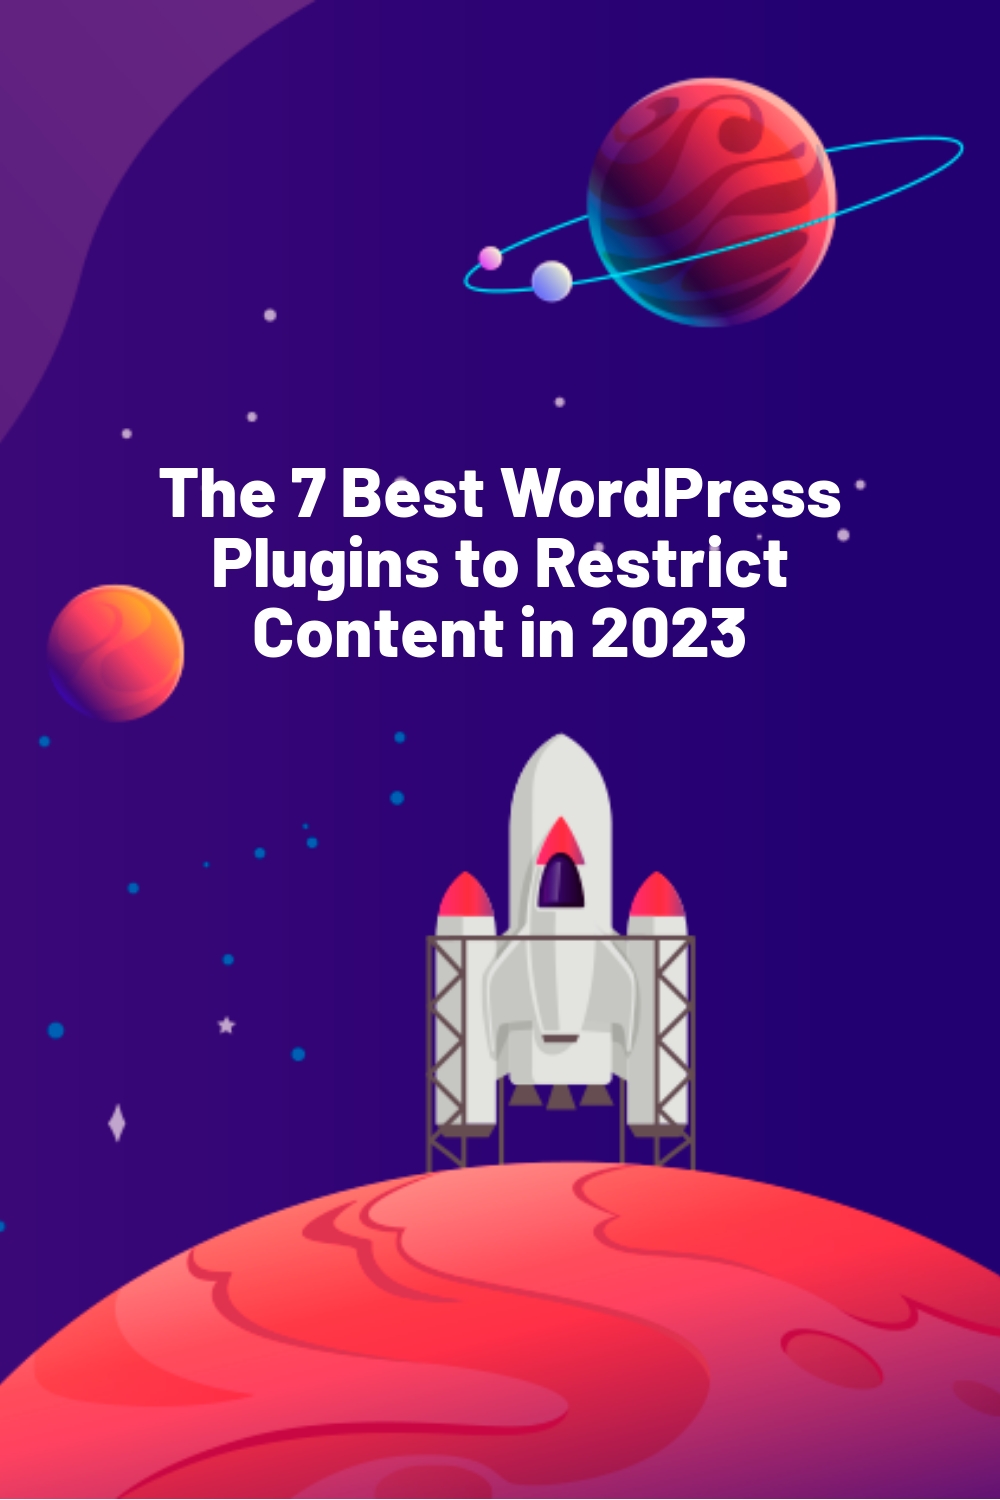 The 7 Best WordPress Plugins to Restrict Content in 2023